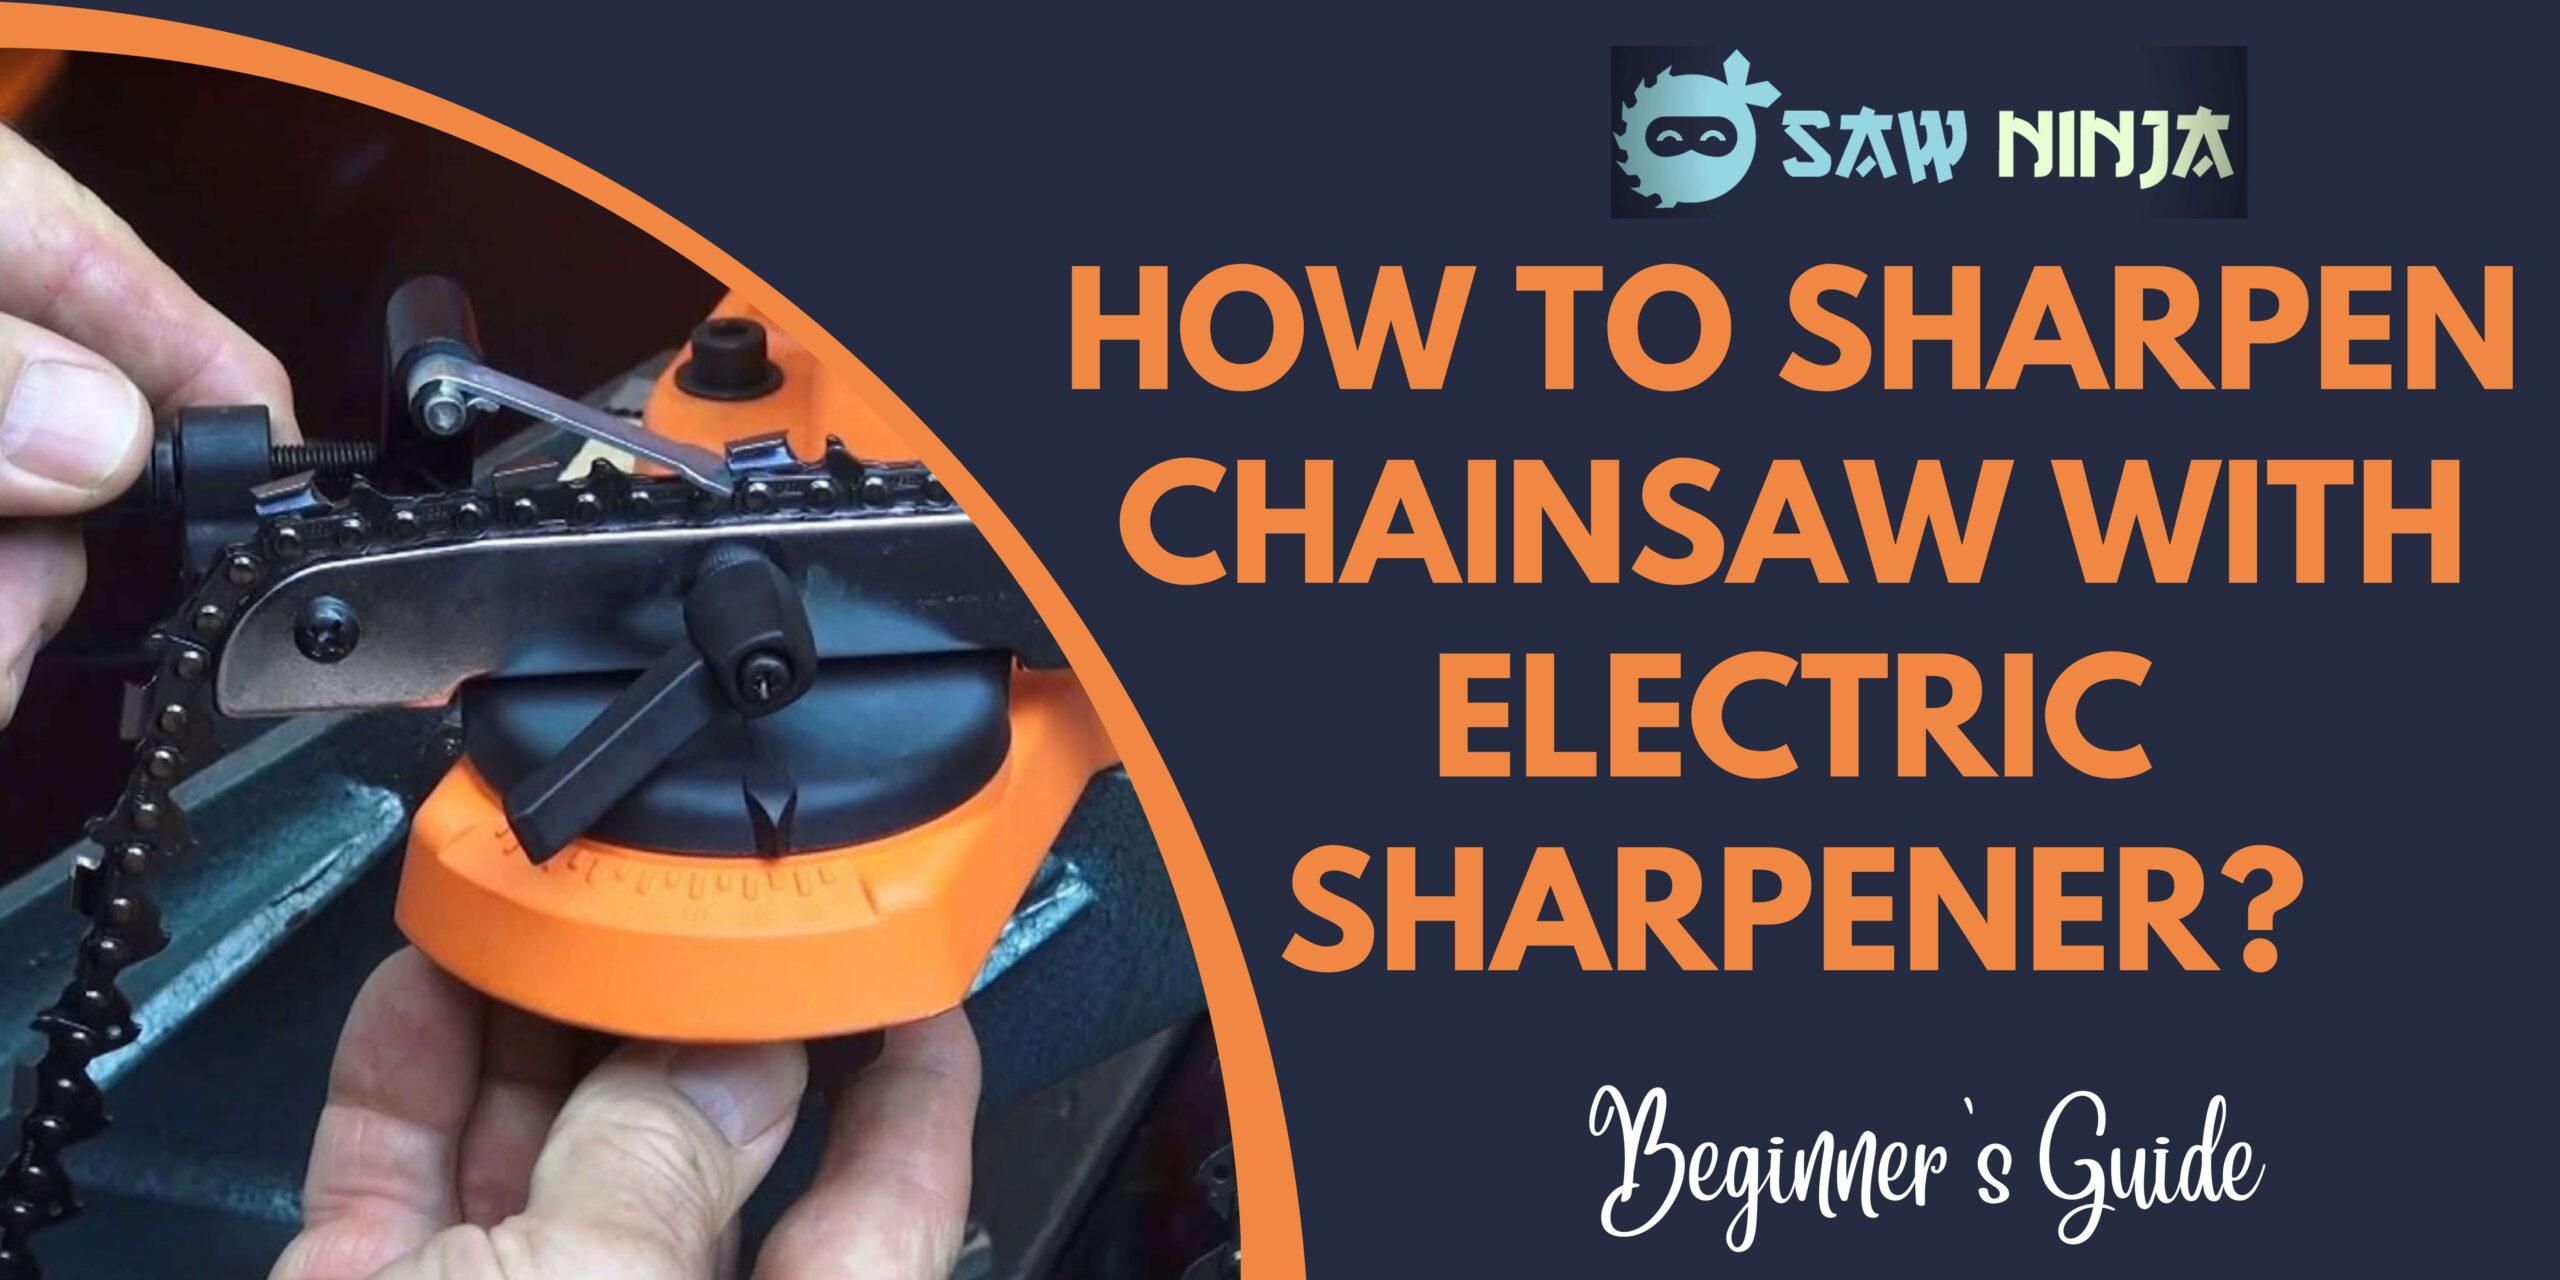 How To Sharpen Chainsaw With Electric Sharpener